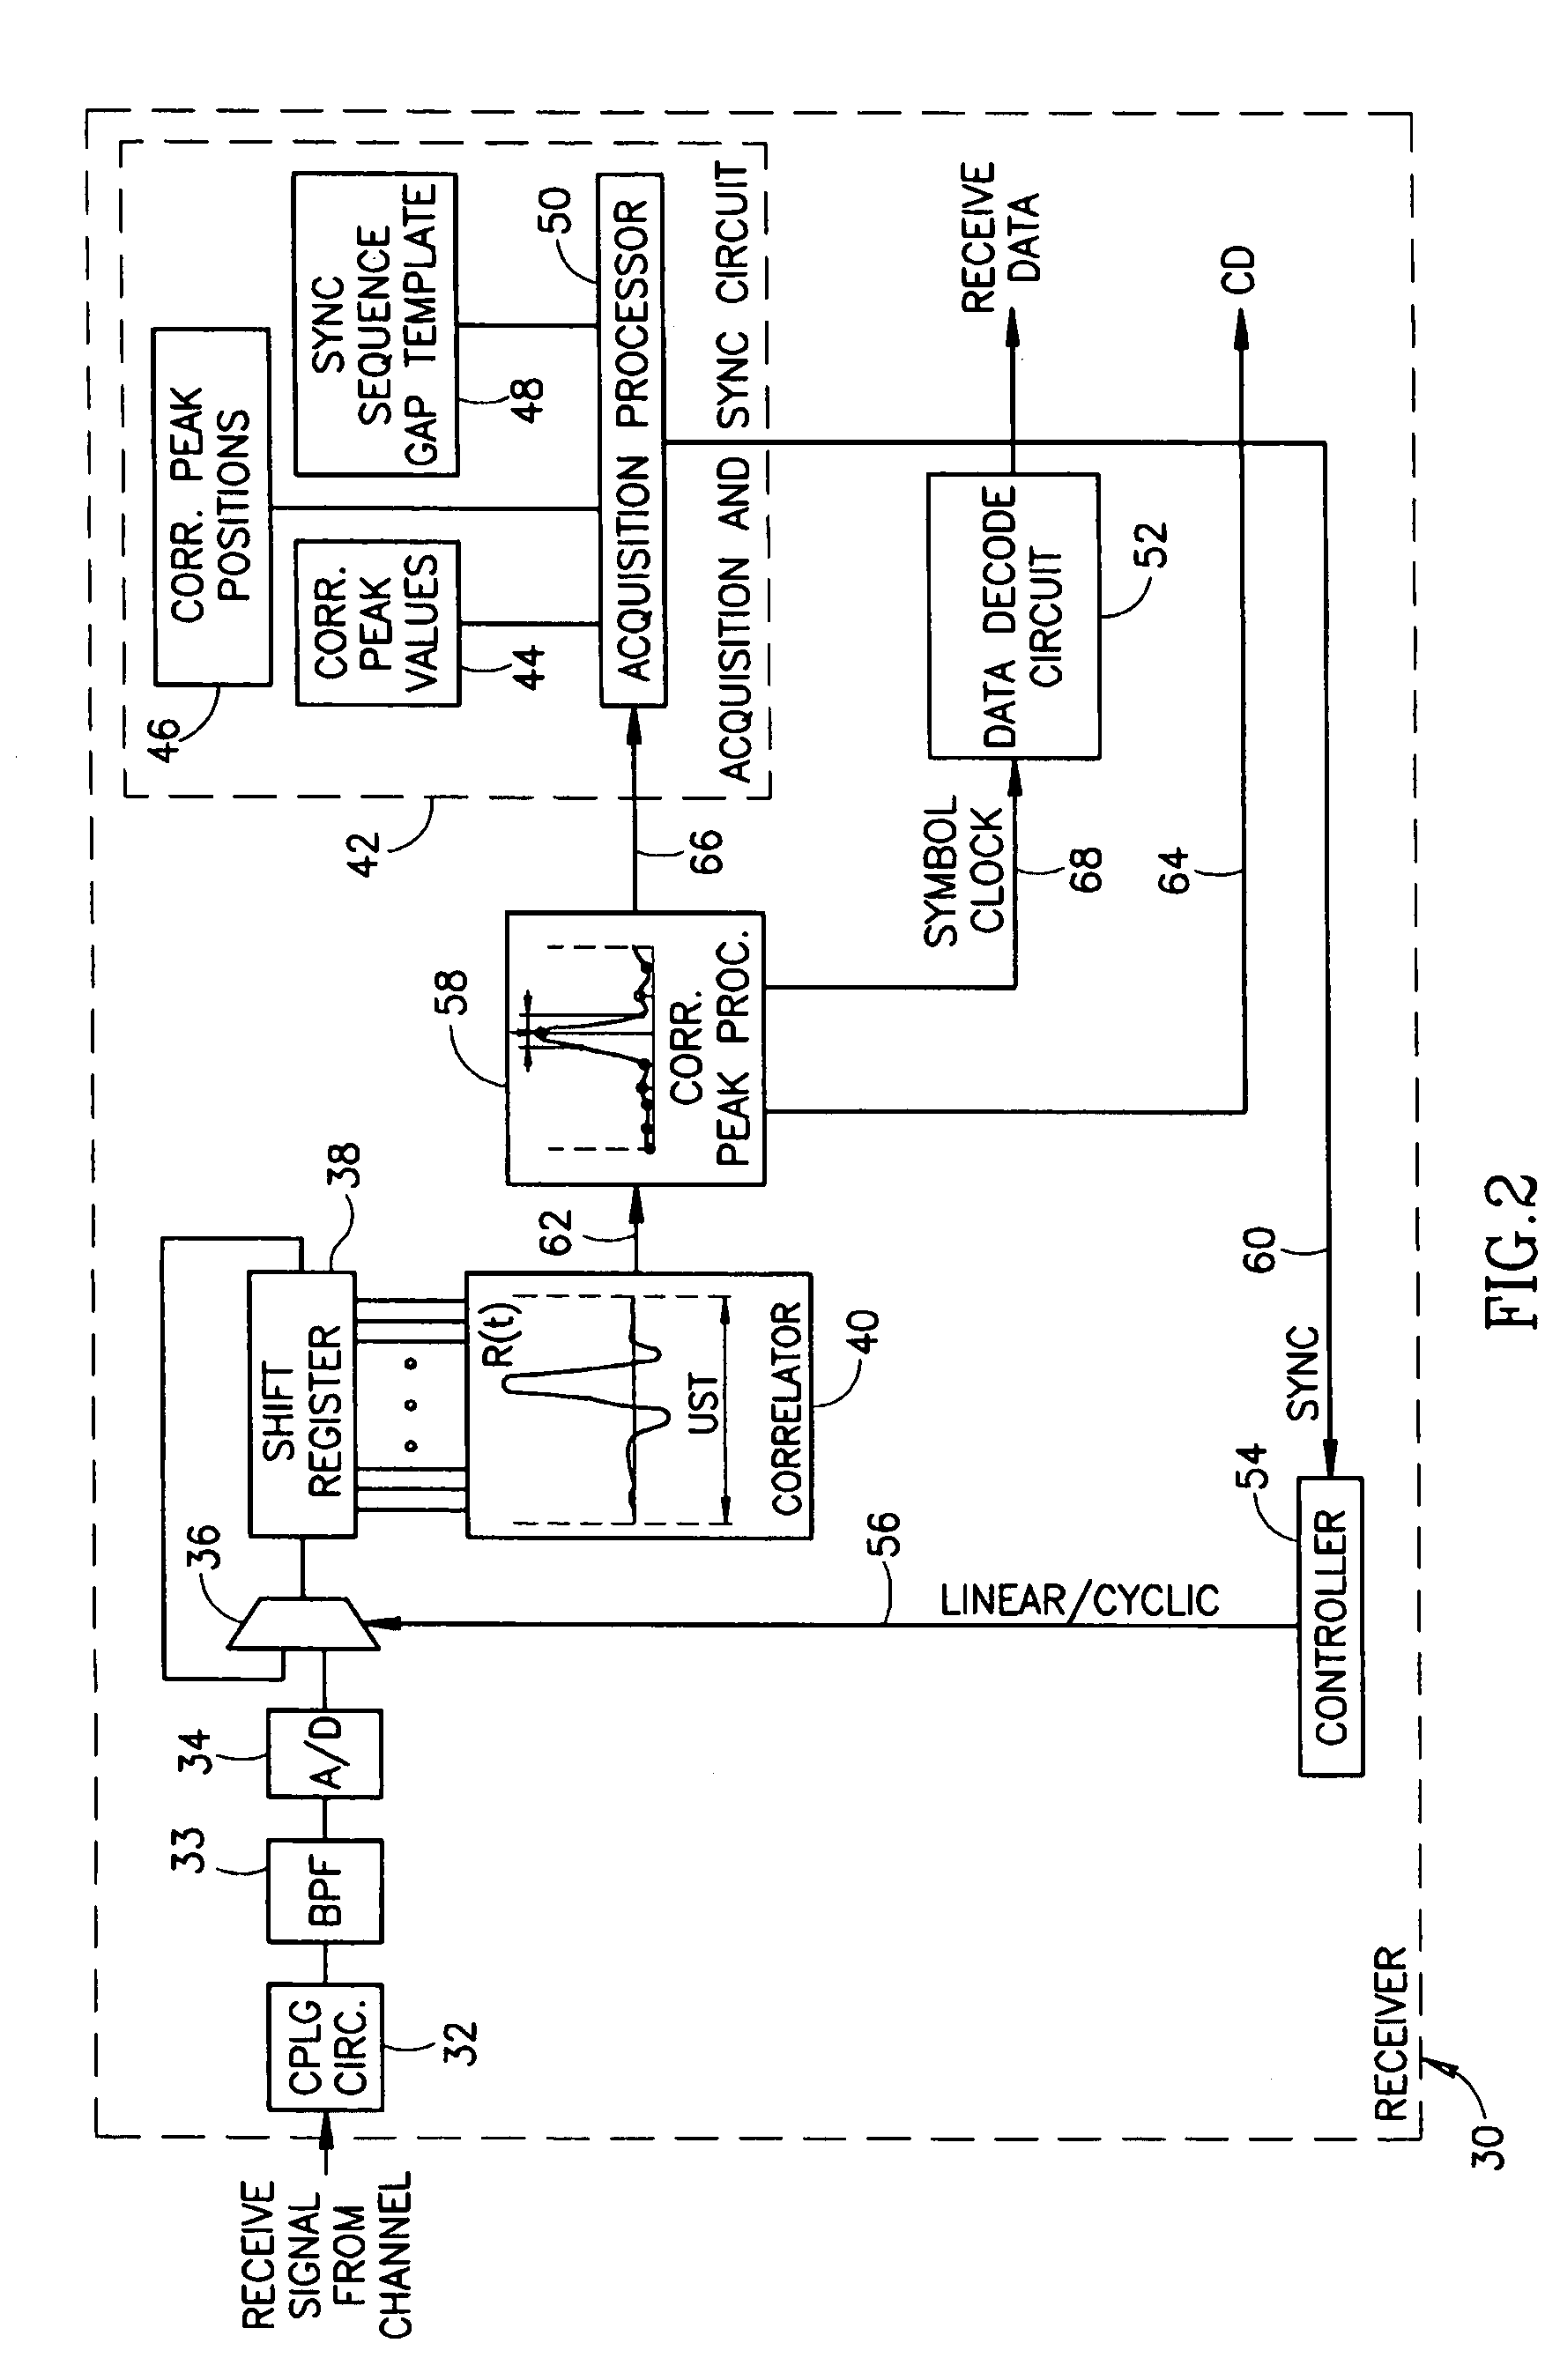 Method and apparatus for generating a synchronization sequence in a spread spectrum communications transceiver